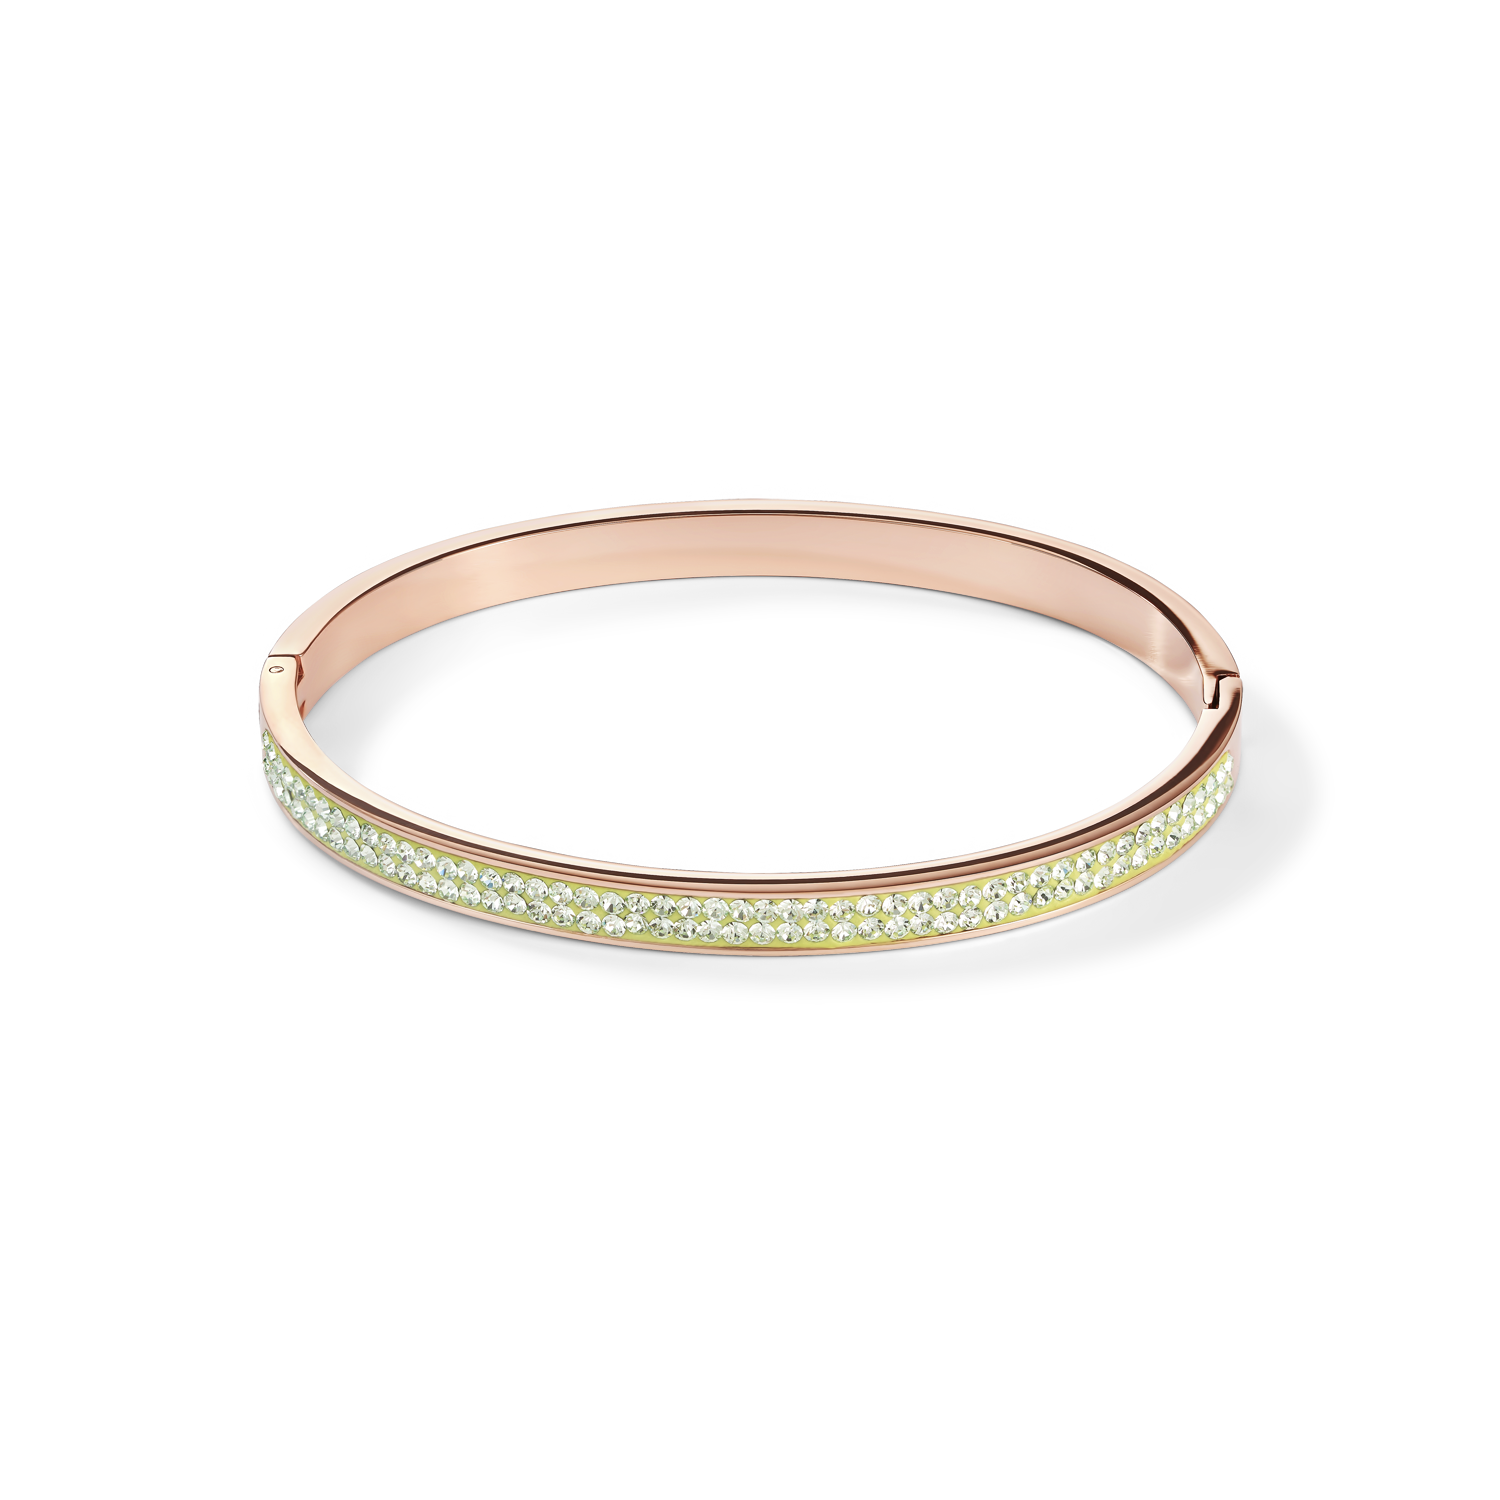 Bangle stainless steel rose gold & crystals pavé light green